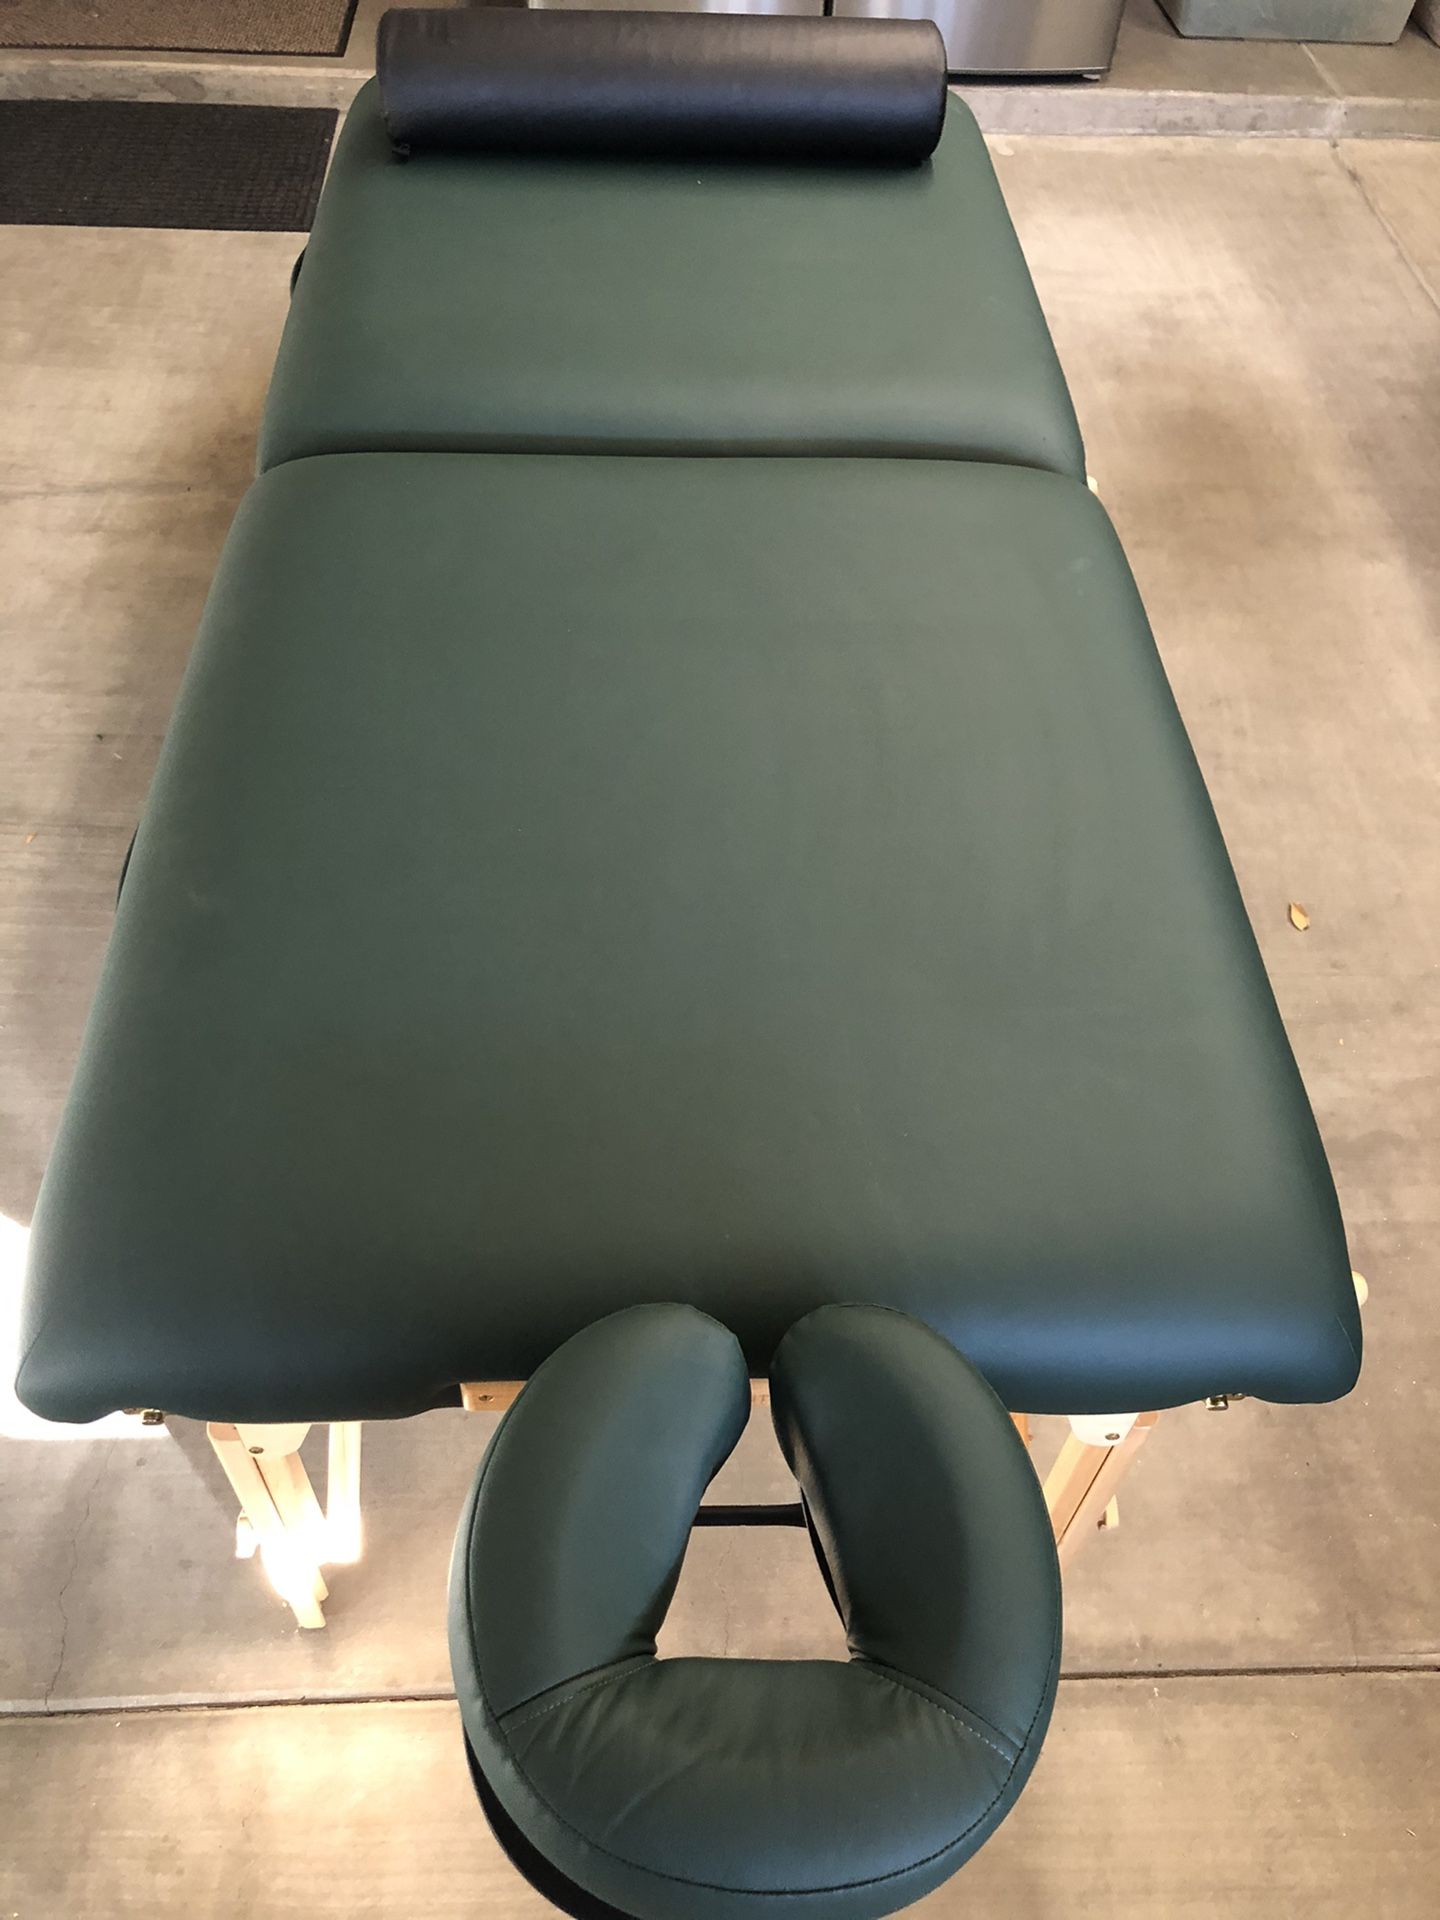 EarthLite Massage Table/Bed